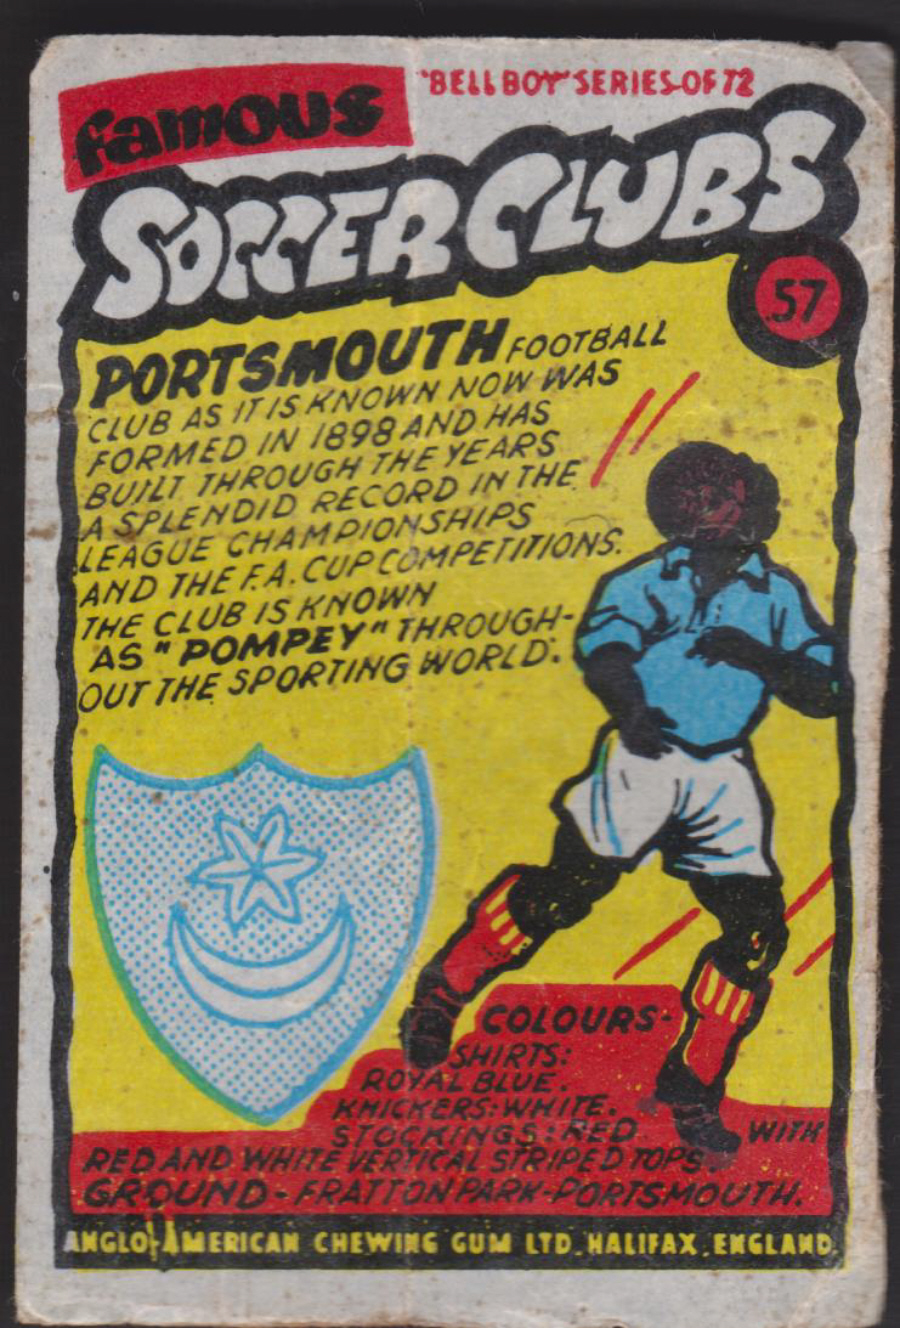 Anglo-American-Chewing-Gum-Wax-Wrapper-Famous-Soccer-Clubs-No-57 -Portsmouth